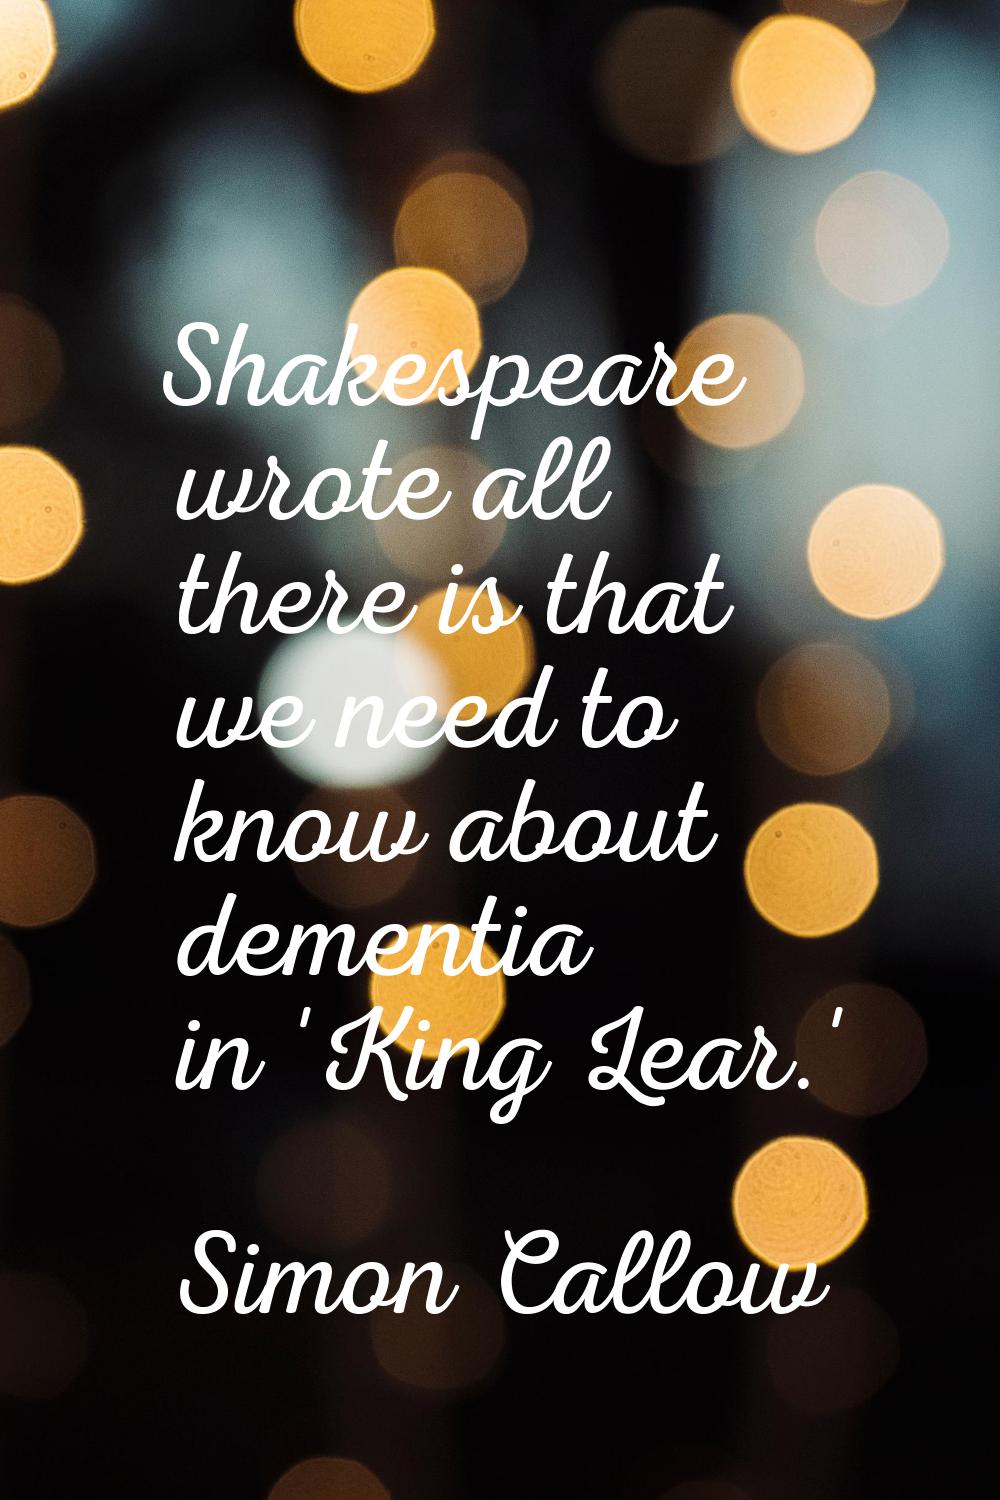 Shakespeare wrote all there is that we need to know about dementia in 'King Lear.'